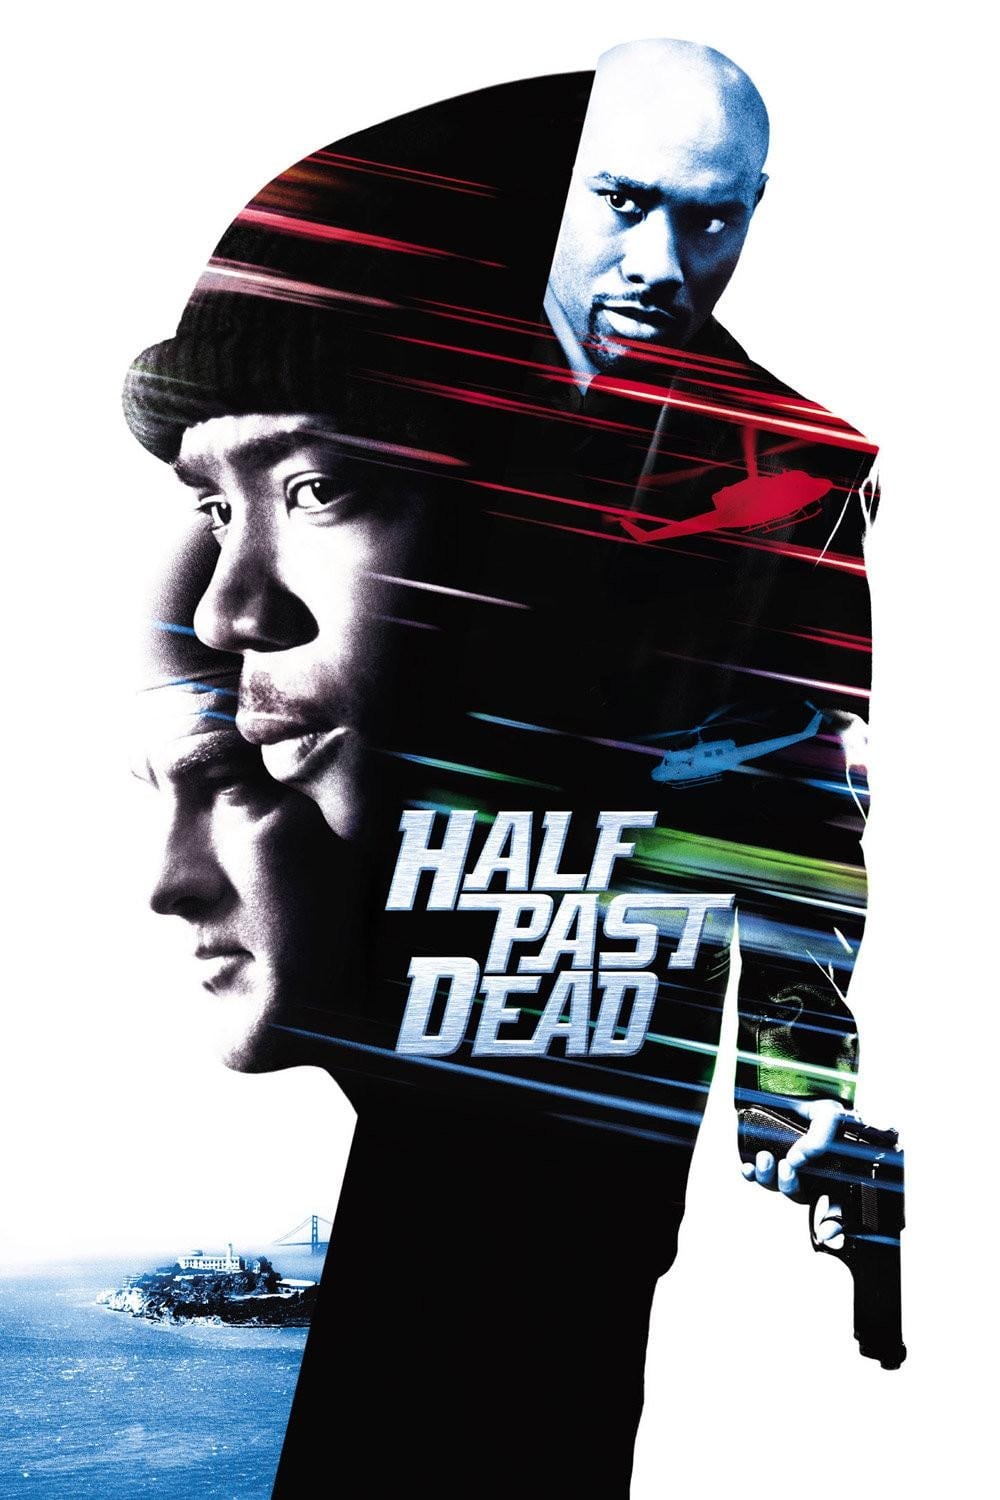 Poster for the movie "Half Past Dead"